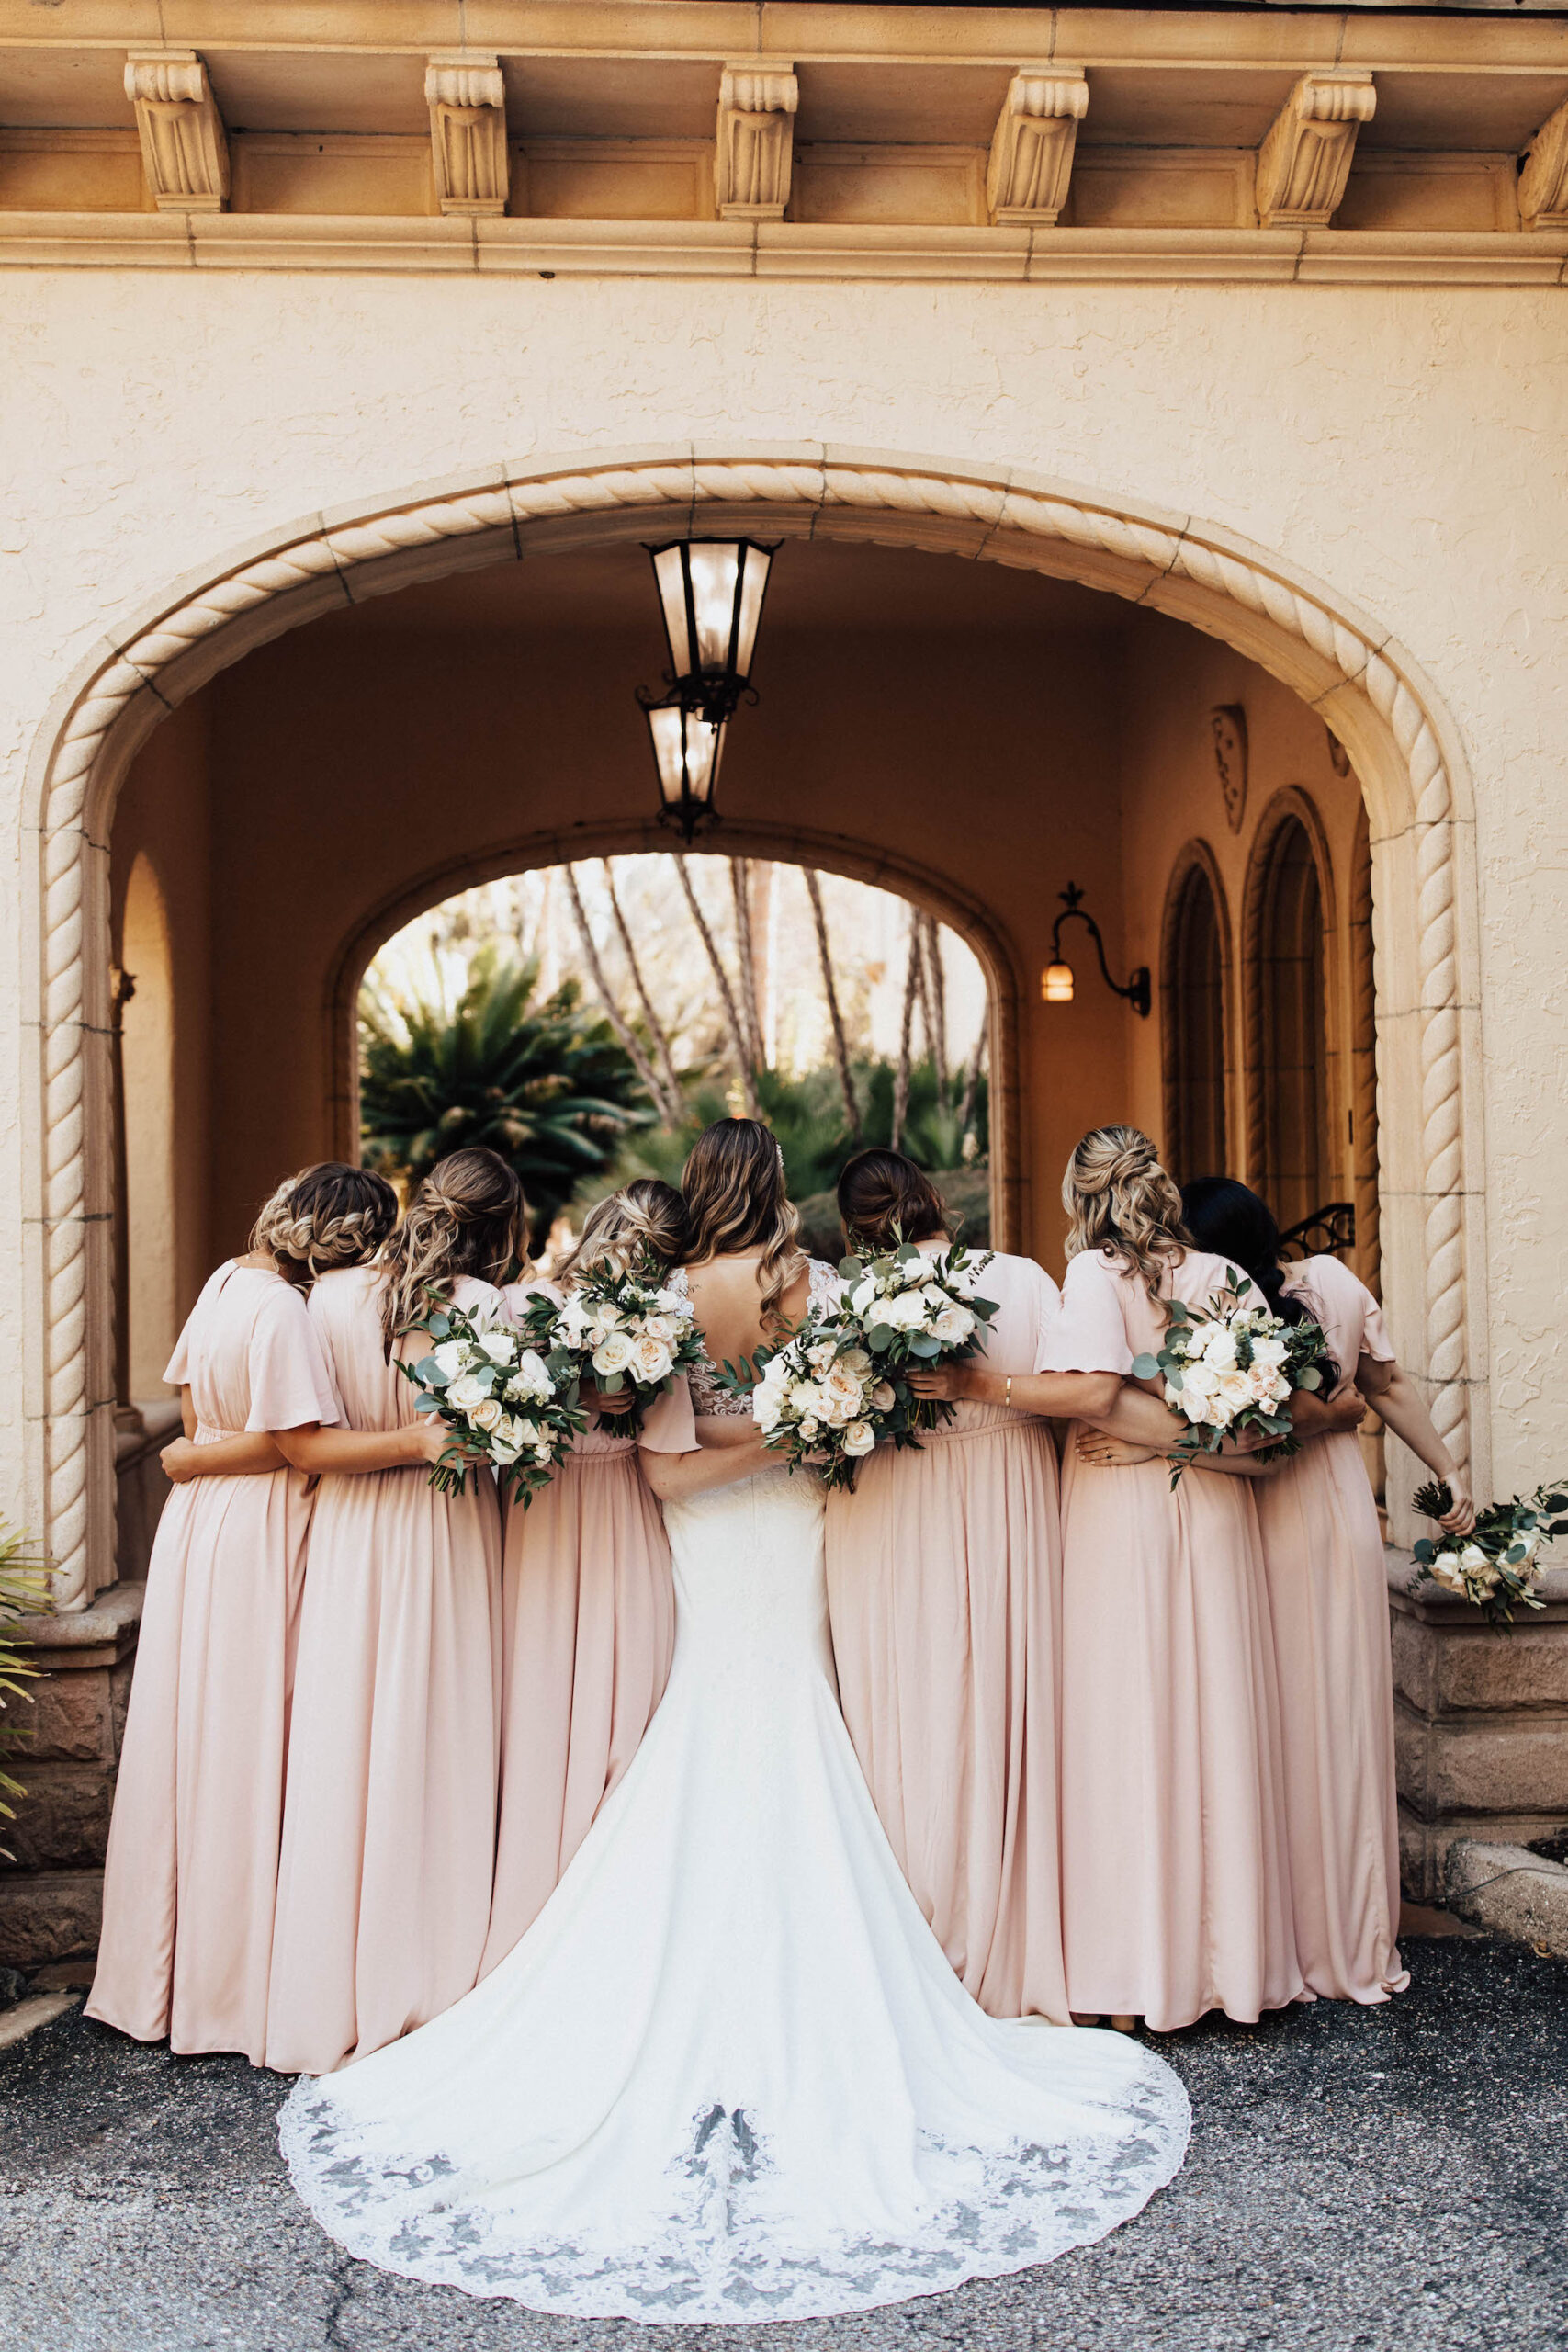 Bride and Bridesmaids in Blush Floor Length Wedding Dresses and White Floral Bouquets | Sarasota Hair and Makeup Artist Femme Akoi